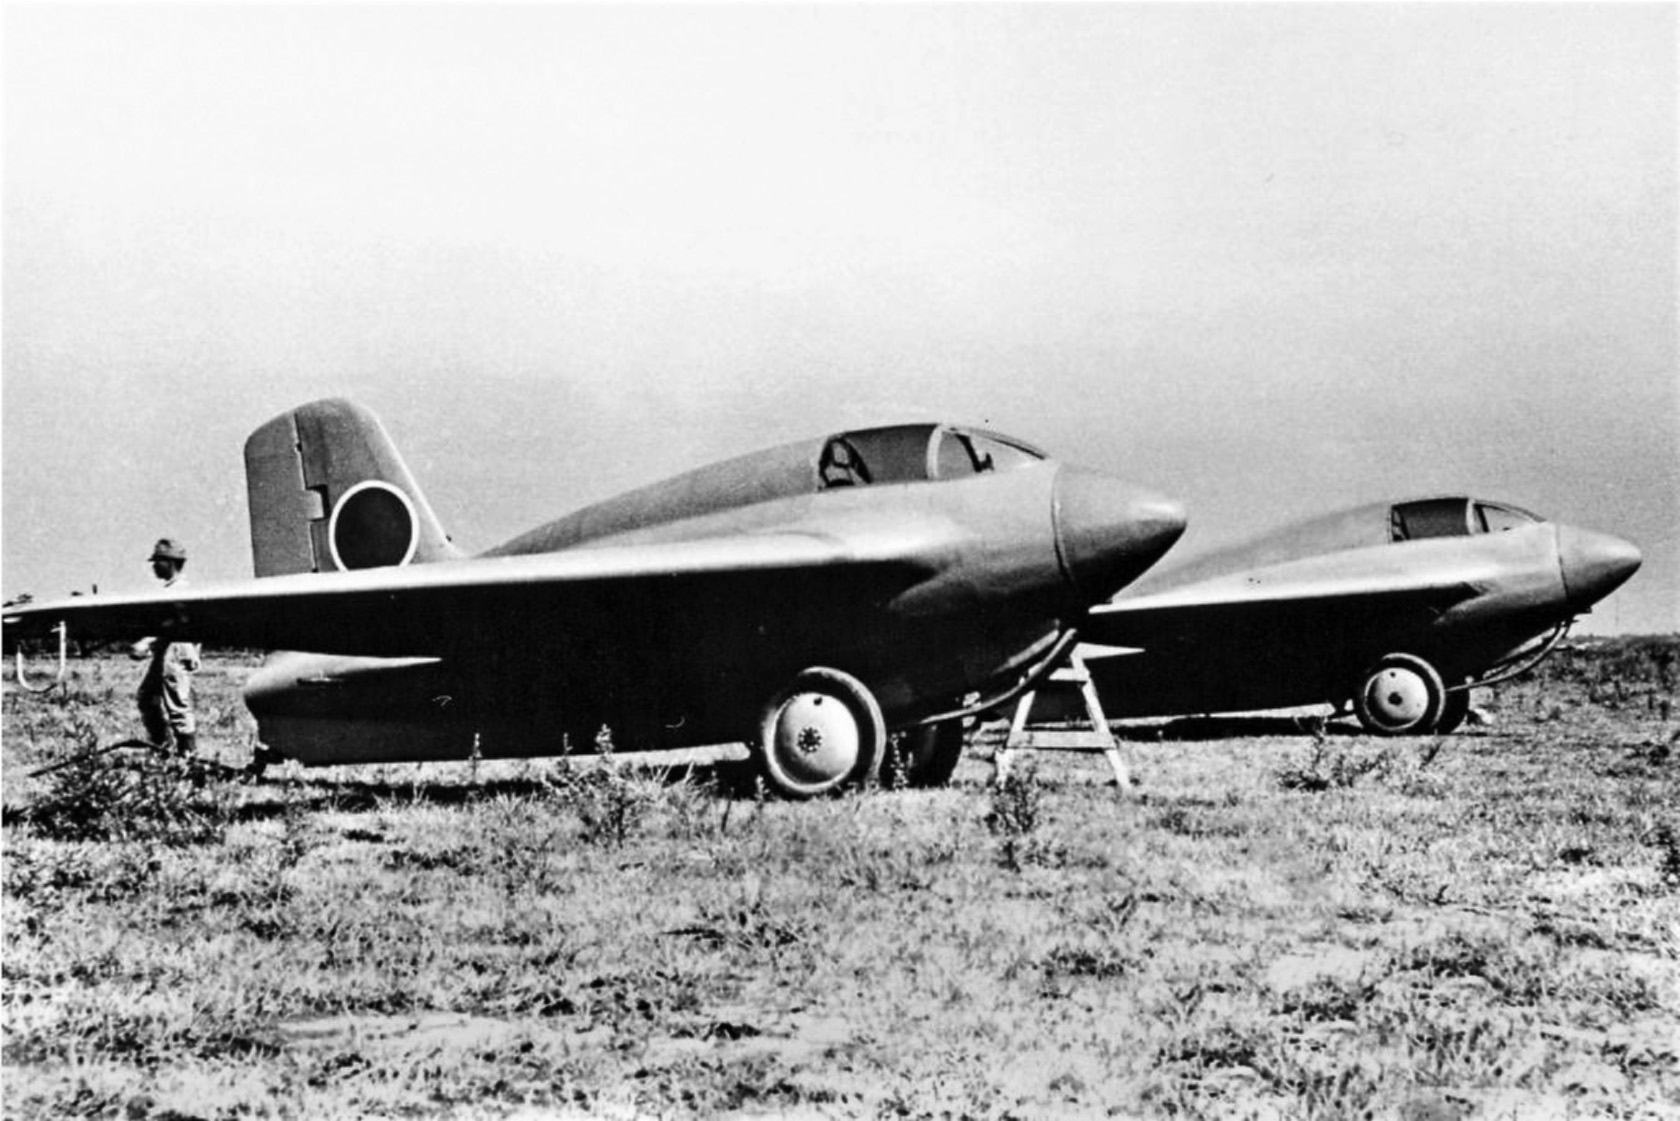 The Germans provided detailed plans of the Komet to their Japanese allies in the last days of World War II, and the Japanese constructed their own version of the rocket-powered interceptor, the Mitsubishi J8M1 Shusui.